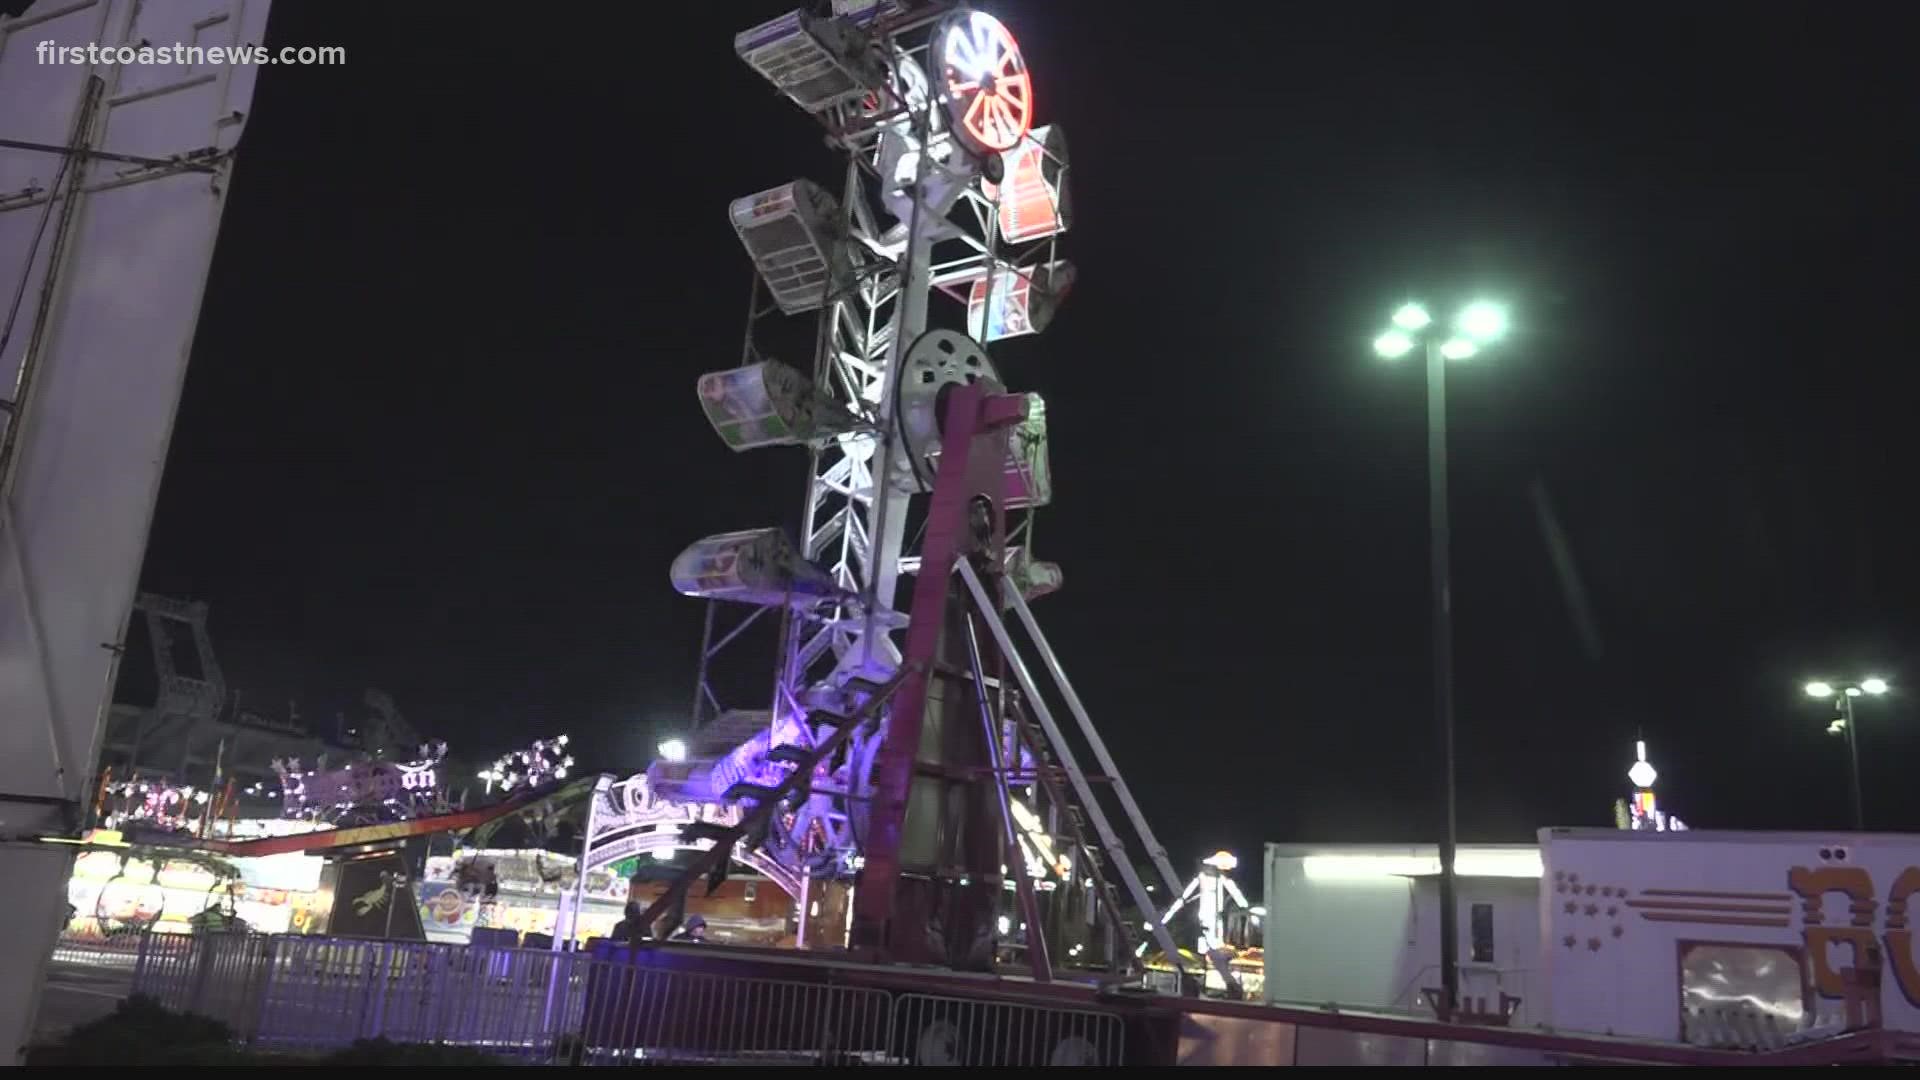 Due to bad weather, the fair was closed Friday but Saturday it was back up and running.